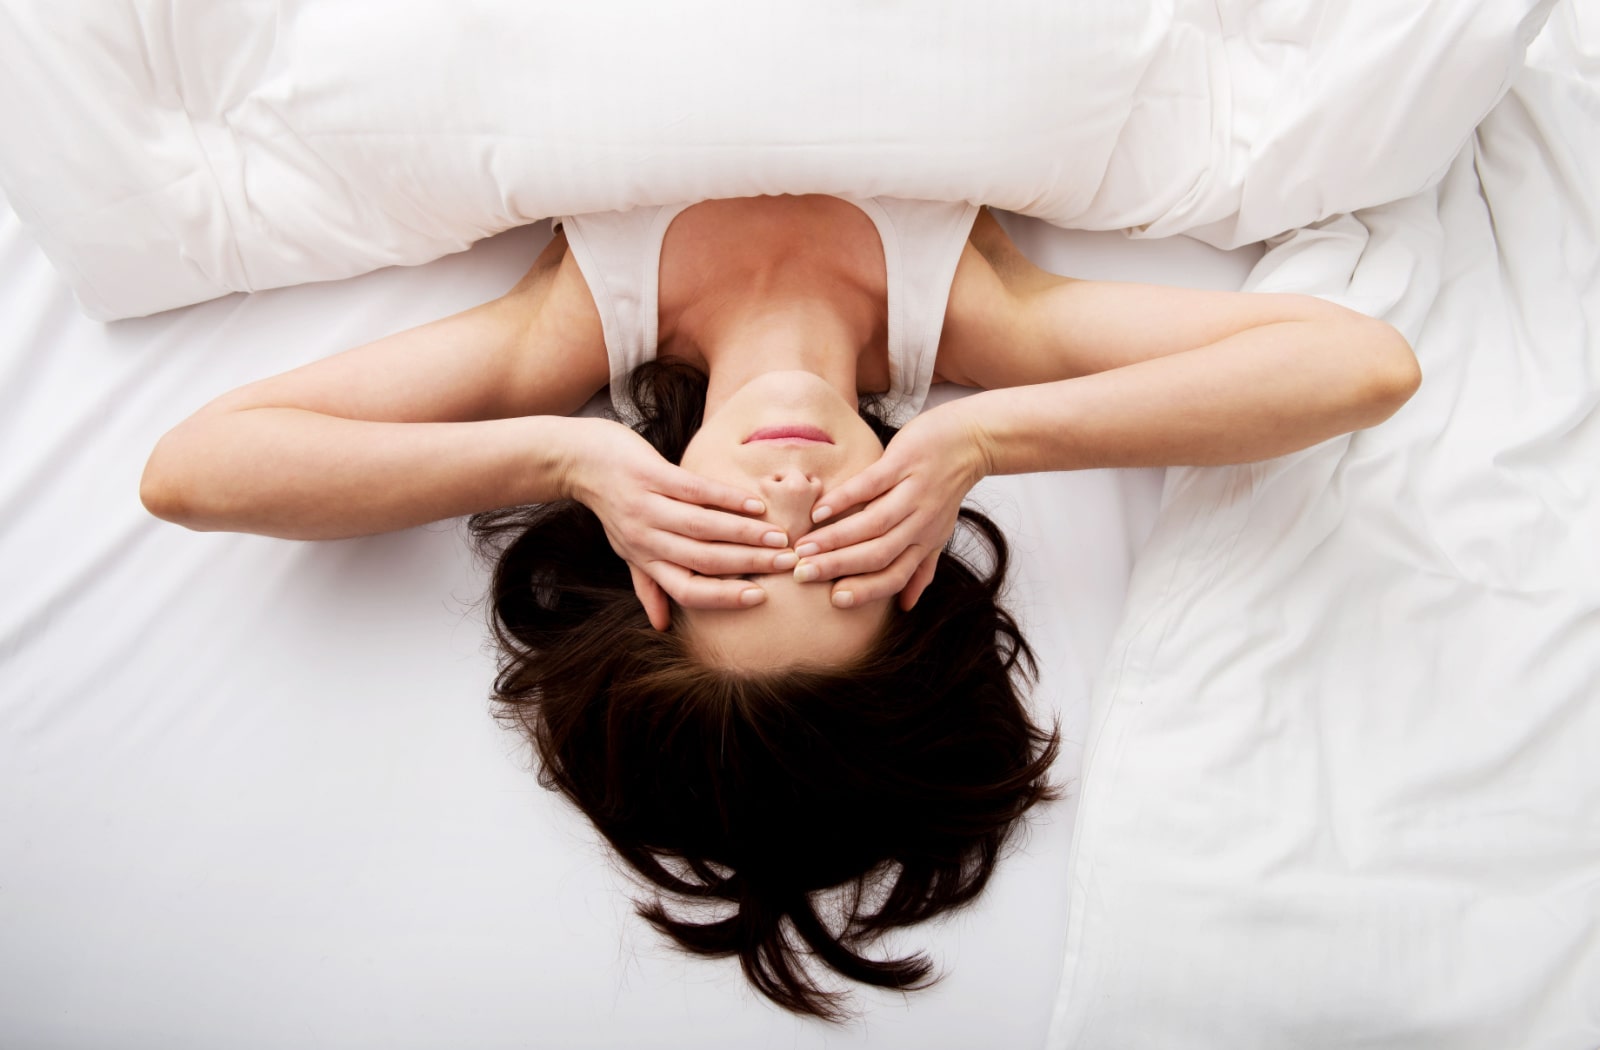 A woman laying in bed with both of her hands over her eyes